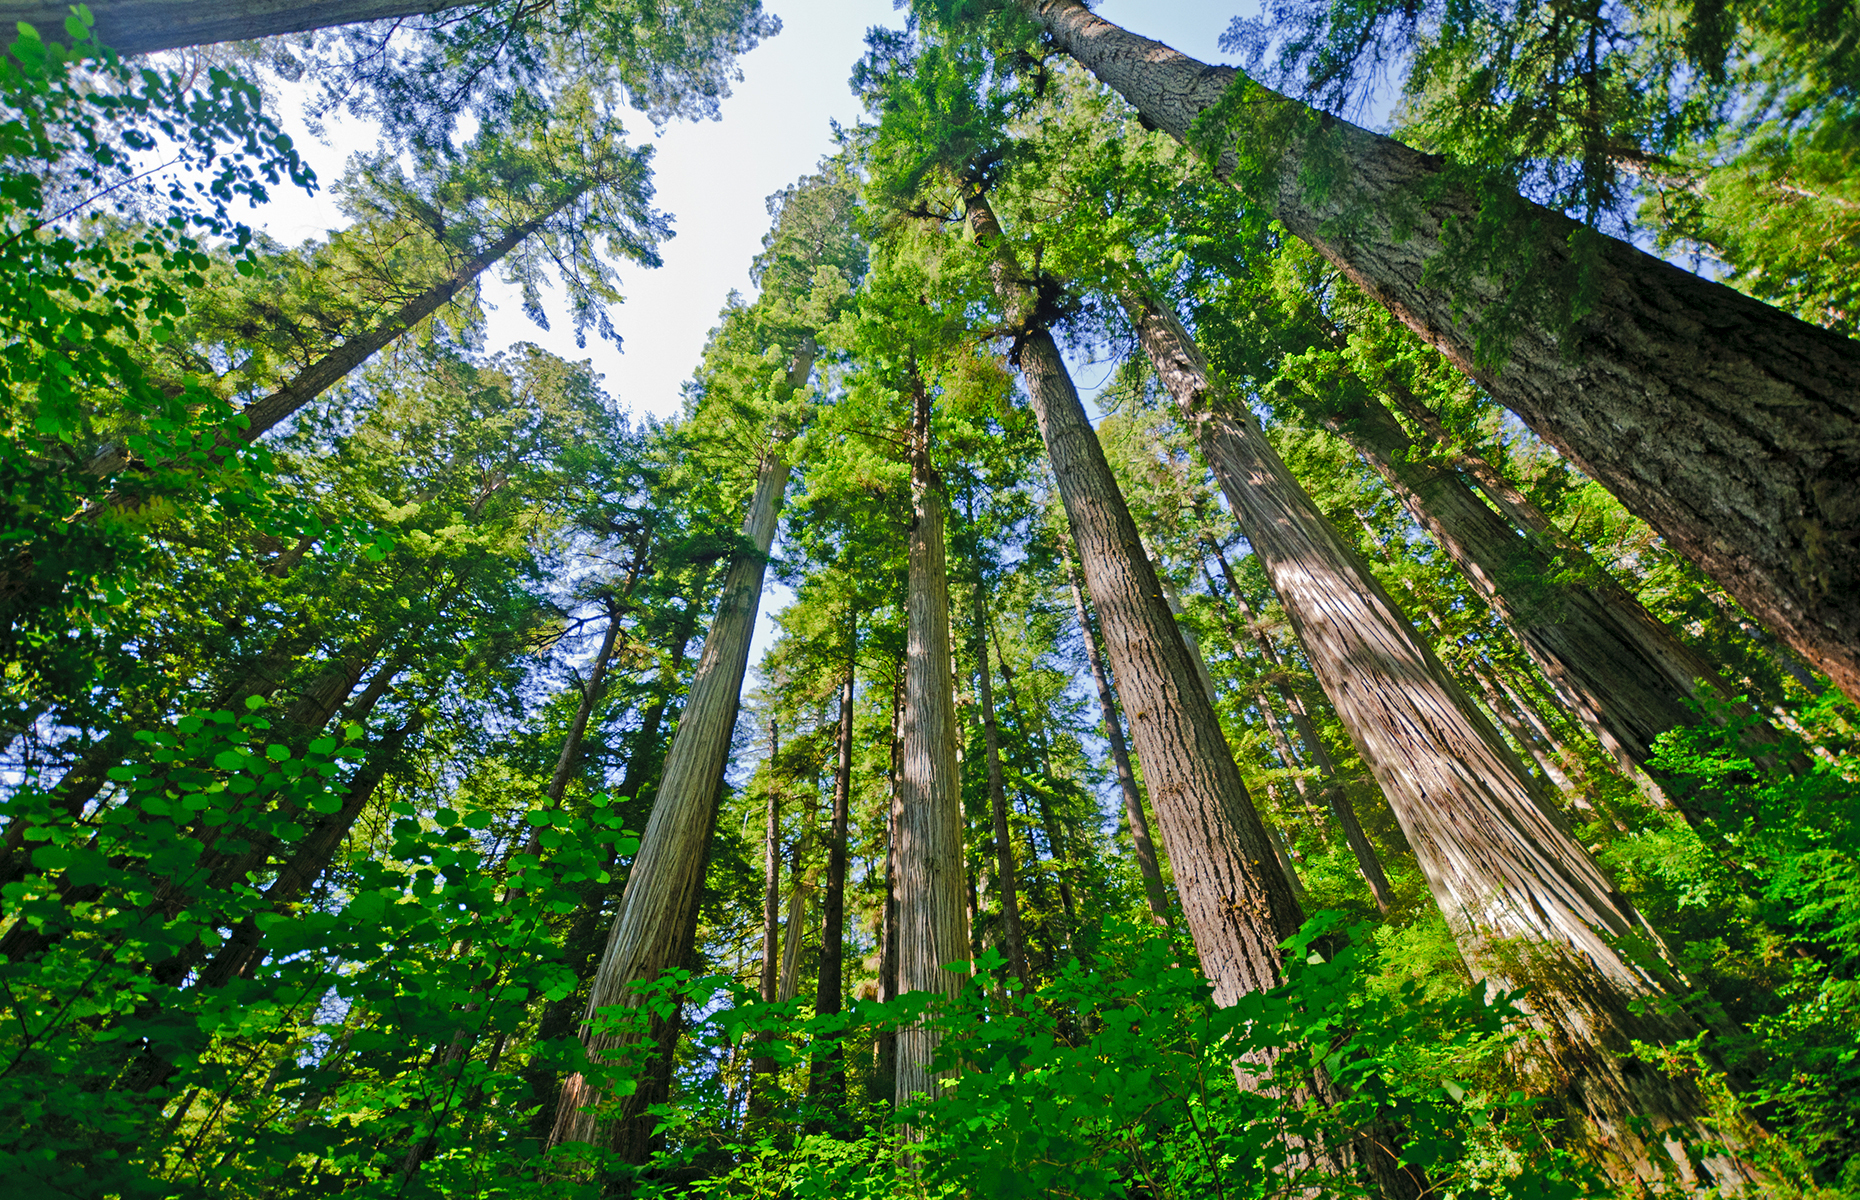 <p>Home to the world’s tallest living tree species, <a href="https://www.parks.ca.gov/?page_id=415" rel="noreferrer noopener">Prairie Creek Redwoods State Park</a> is a tourist hotspot. Despite its iconic status, it still hosts a large elk population, and consists of 14,000 acres of protected wilderness area.</p>